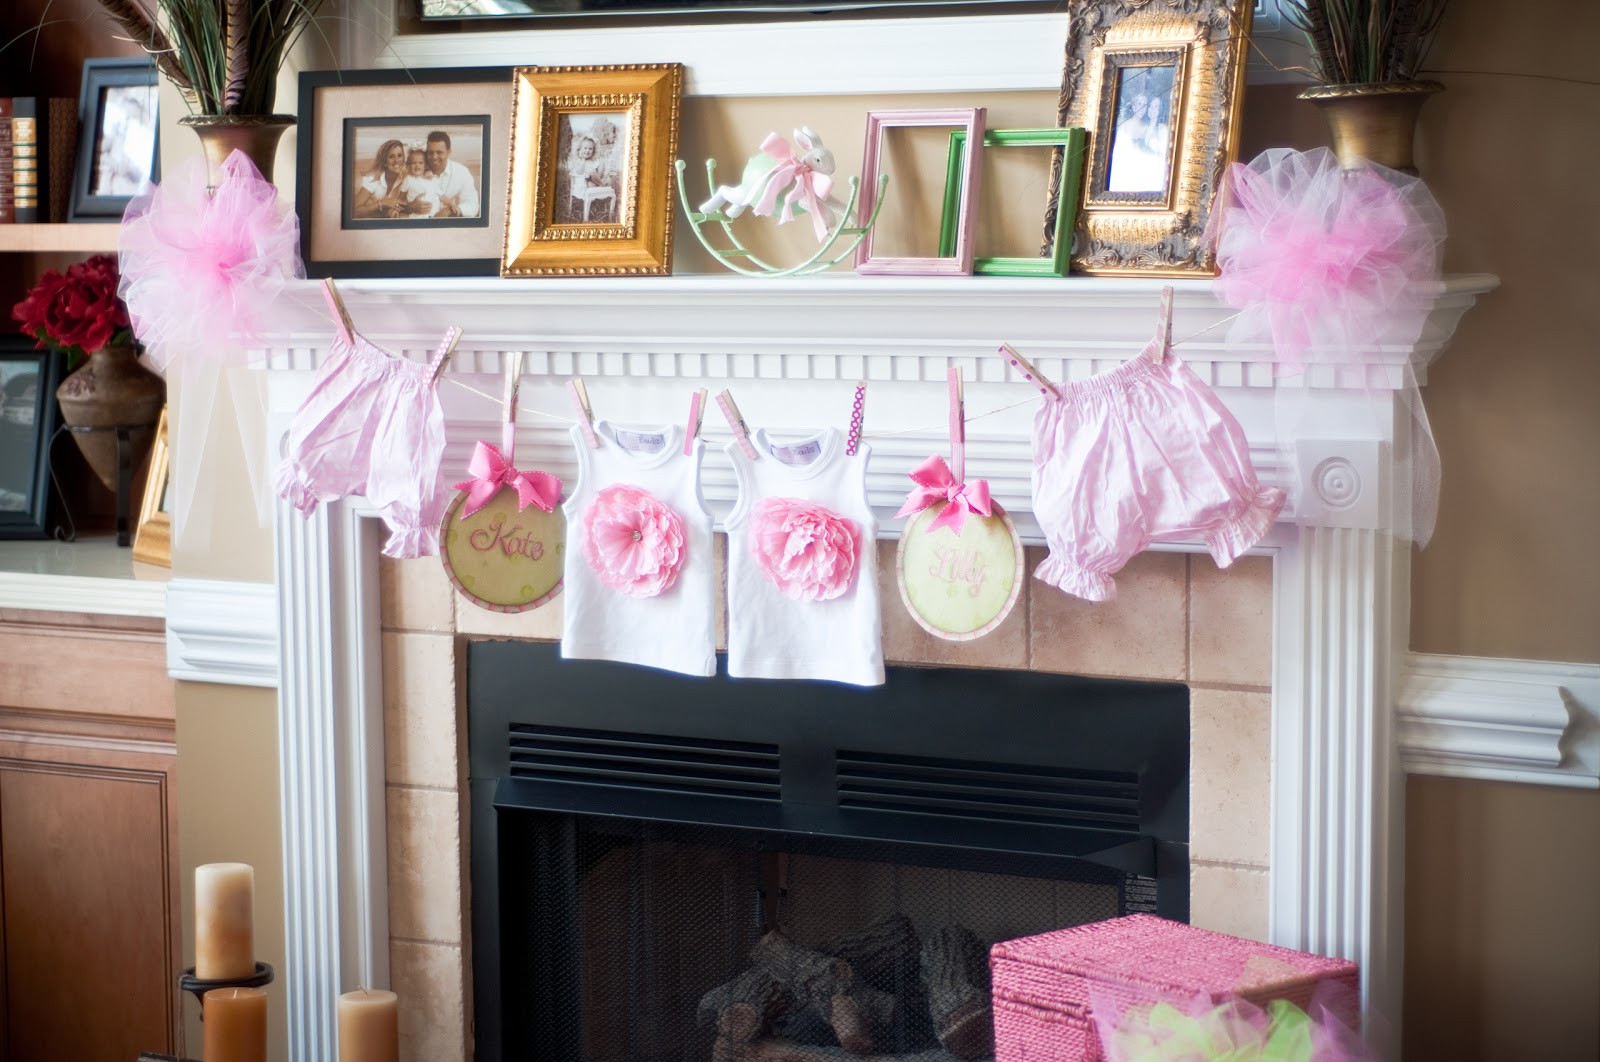 Baby Shower Decorating Ideas
 paws & re thread baby shower decorating ideas clothes